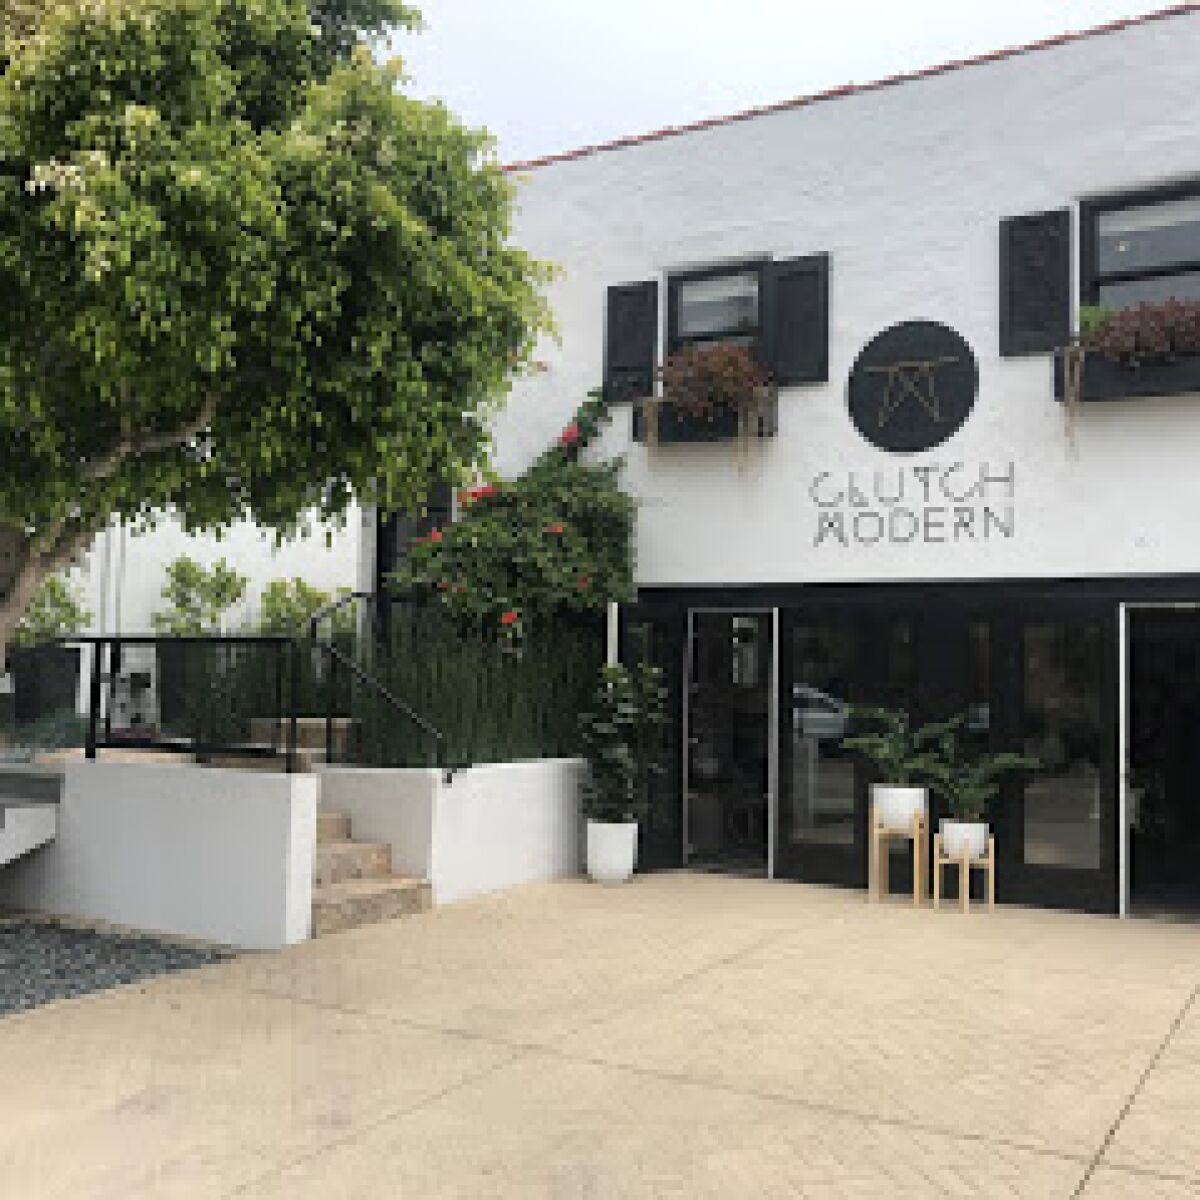 Clutch Modern is one of many businesses that have had to close their storefronts.